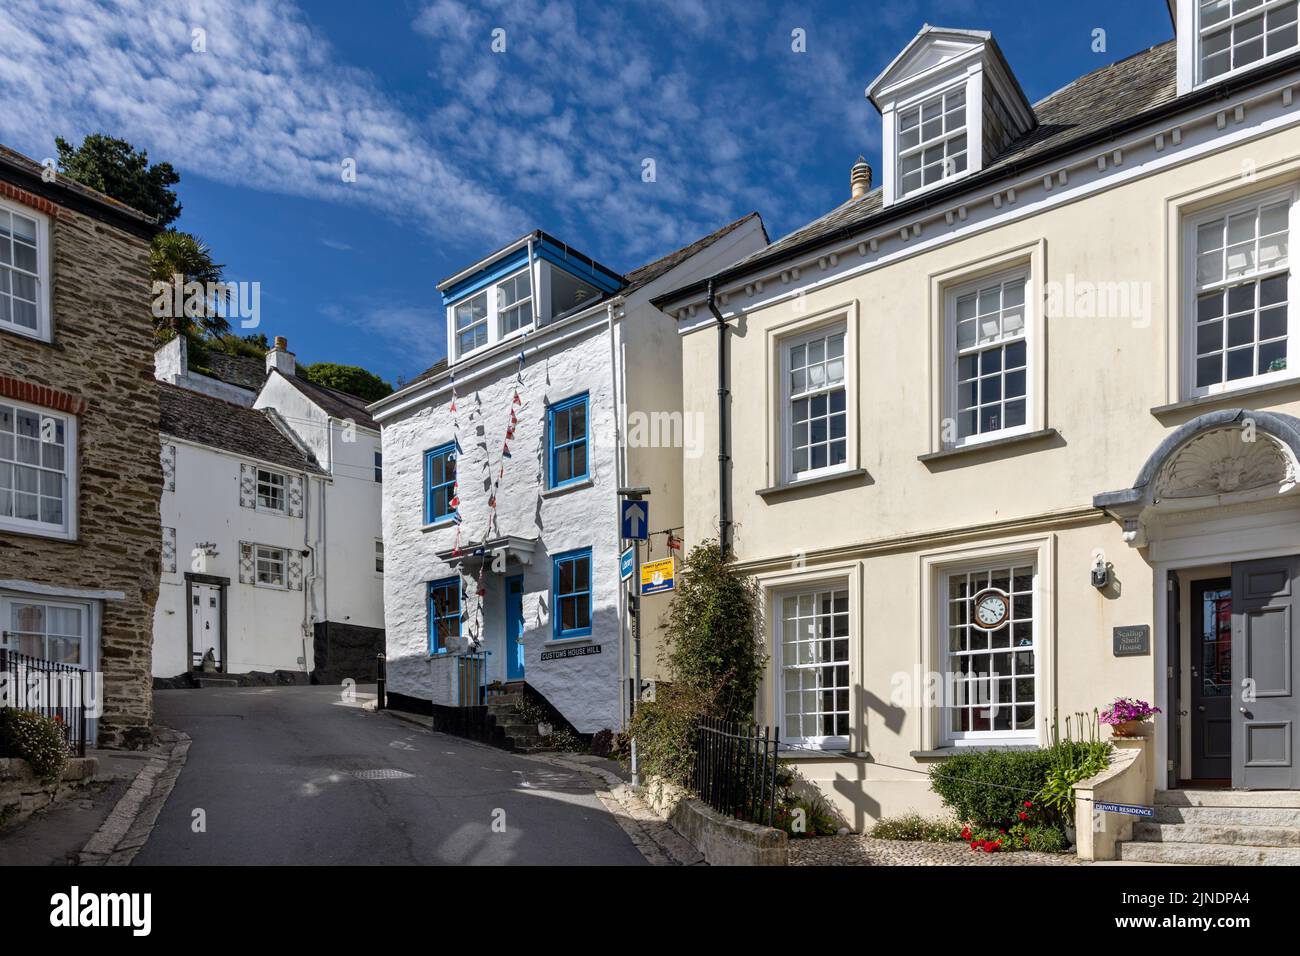 Customs House Hill, a picturesque narrow street in Fowey, Cornwall. Stock Photo